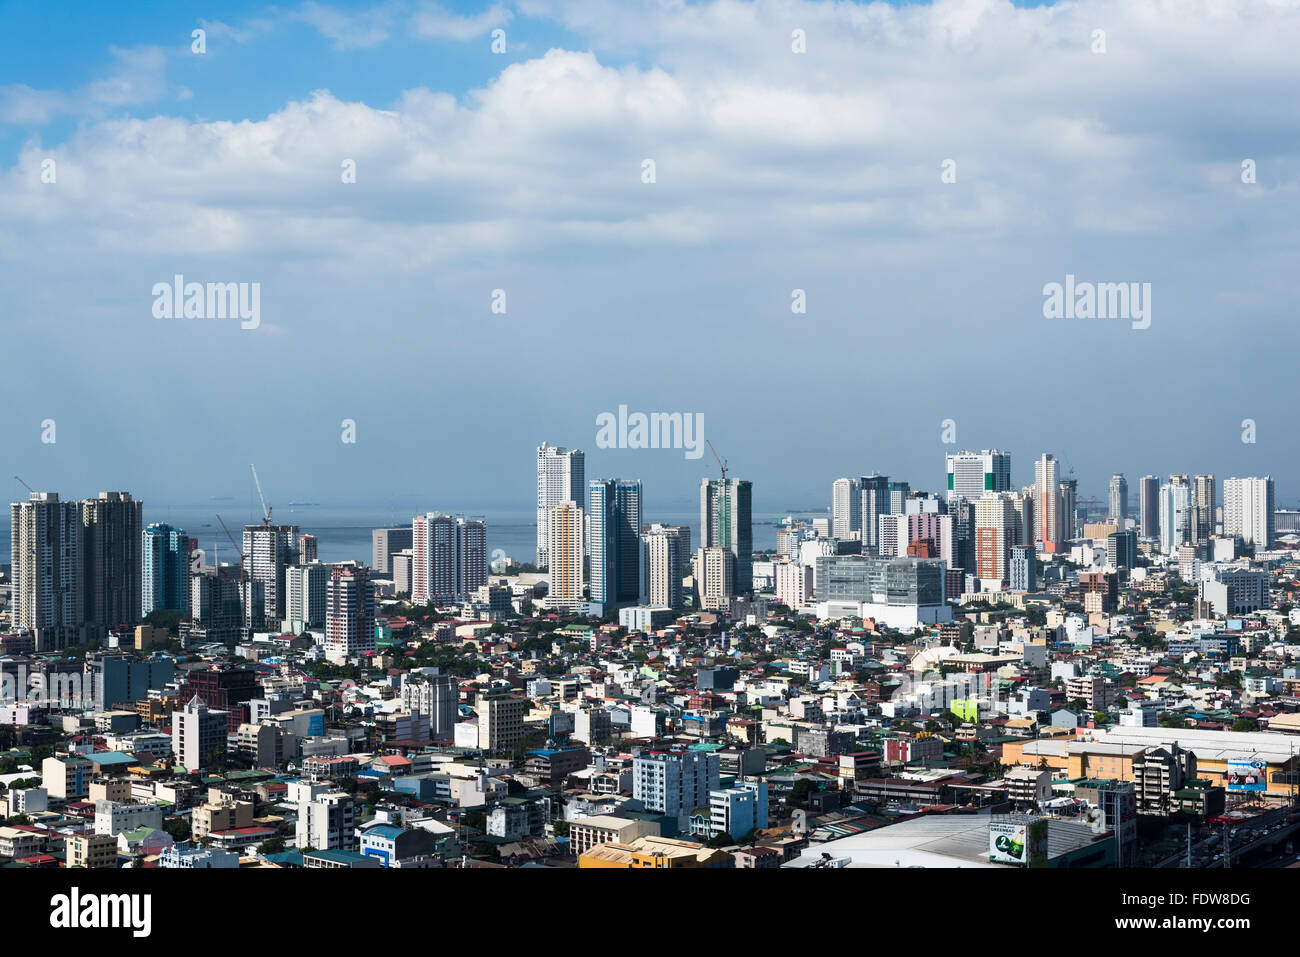 A view of the city and the skyscrapers overlooking Manila Bay in the Philippines Stock Photo